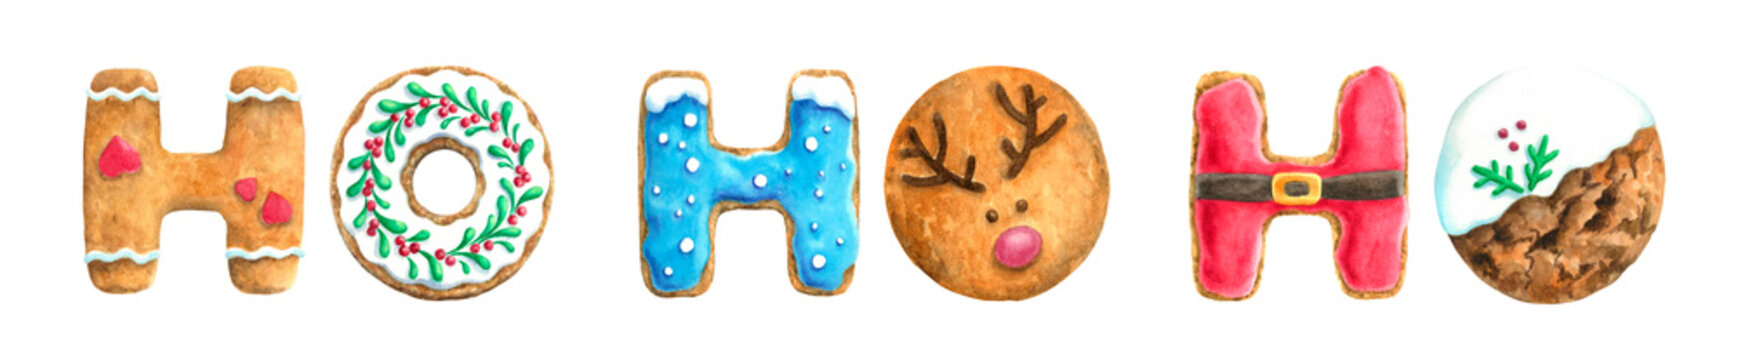 HO-HO-HO. Merry Christmas and Happy New Year Postcard. Gingerbread cookies. Watercolor illustration.